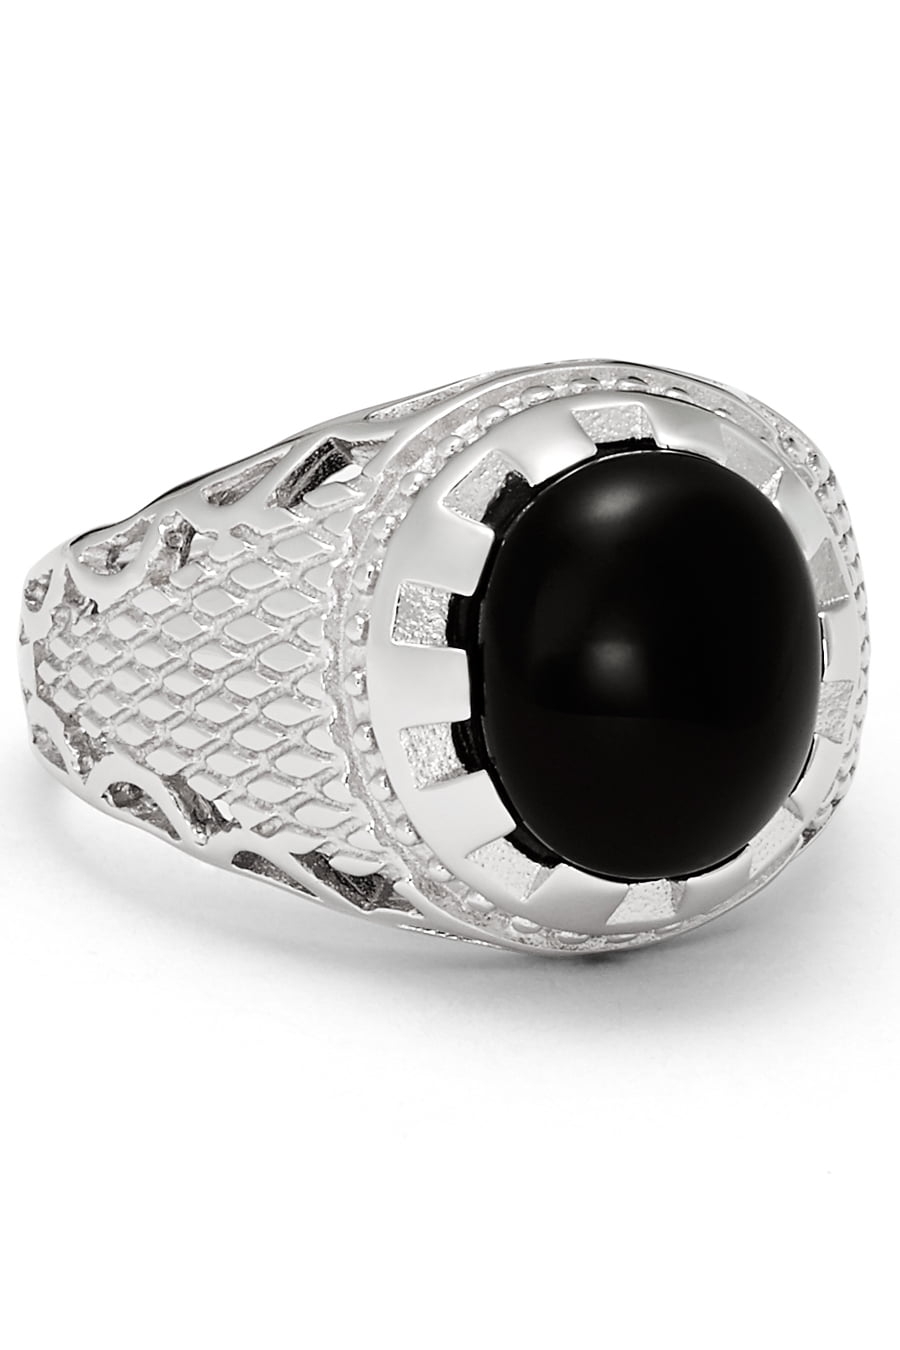 Mens White Gold On 925 Sterling Silver Black Round Solitaire Onyx Ring Size 9-11 